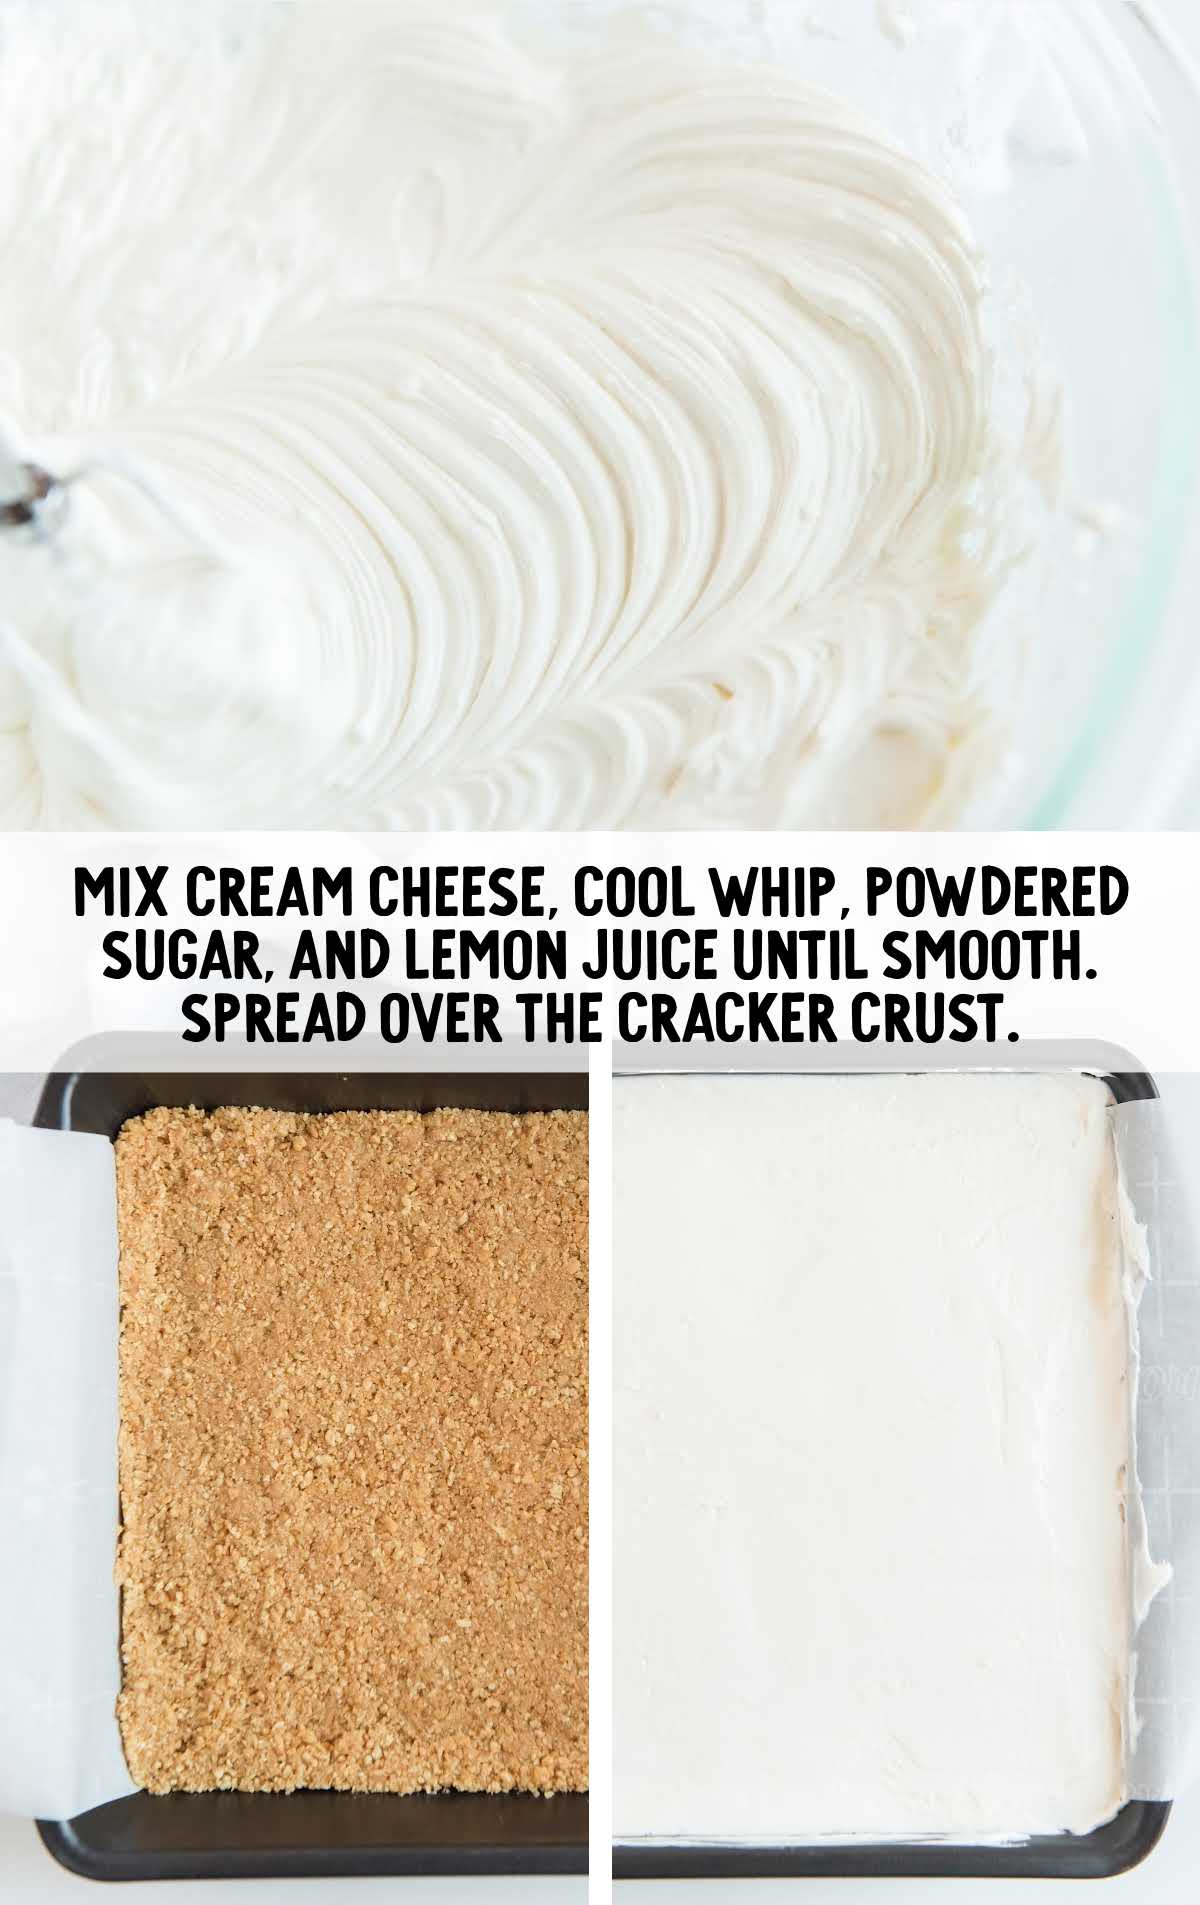 cream cheese, cool whip, powdered sugar, and lemon juice mixed and spread over he cracker crust